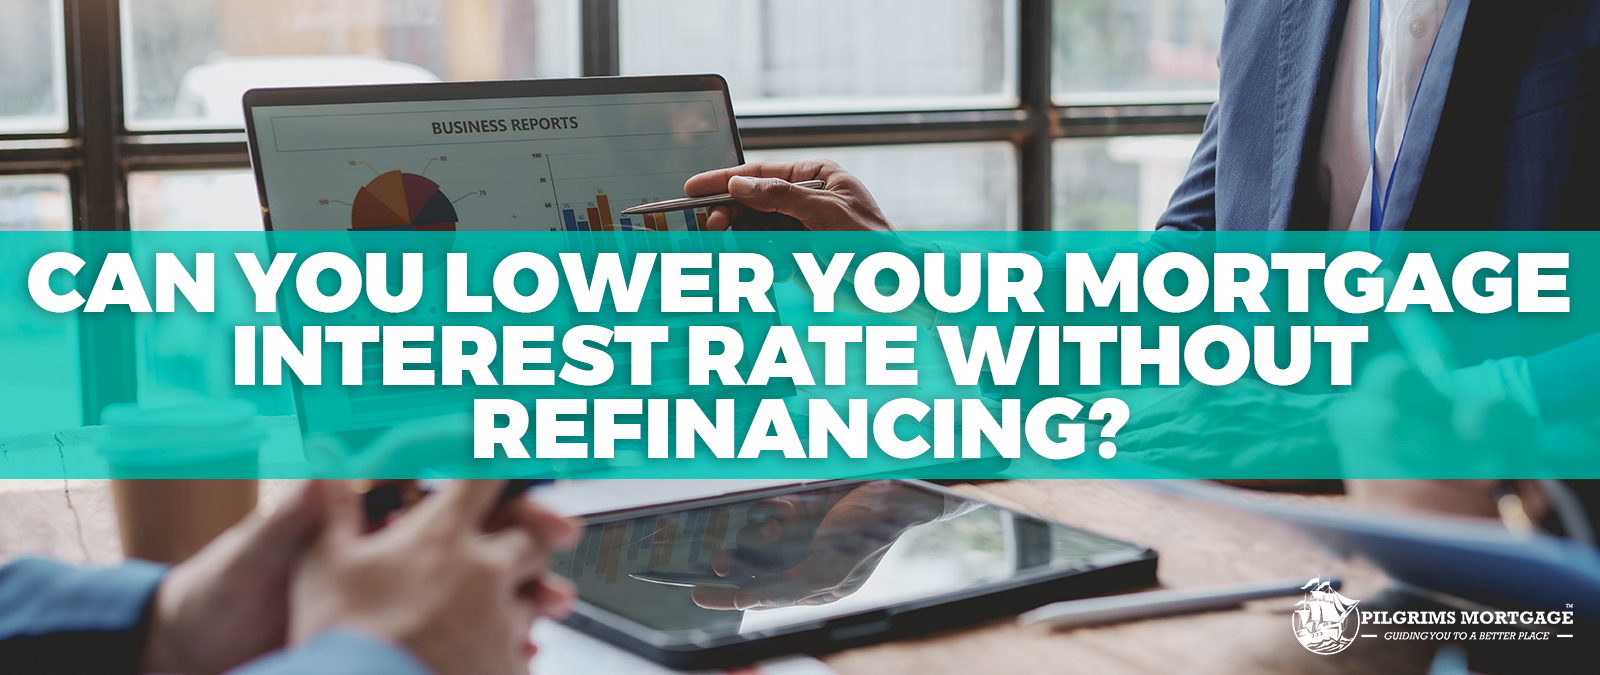 Can You Lower Your Mortgage Interest Rate Without Refinancing?